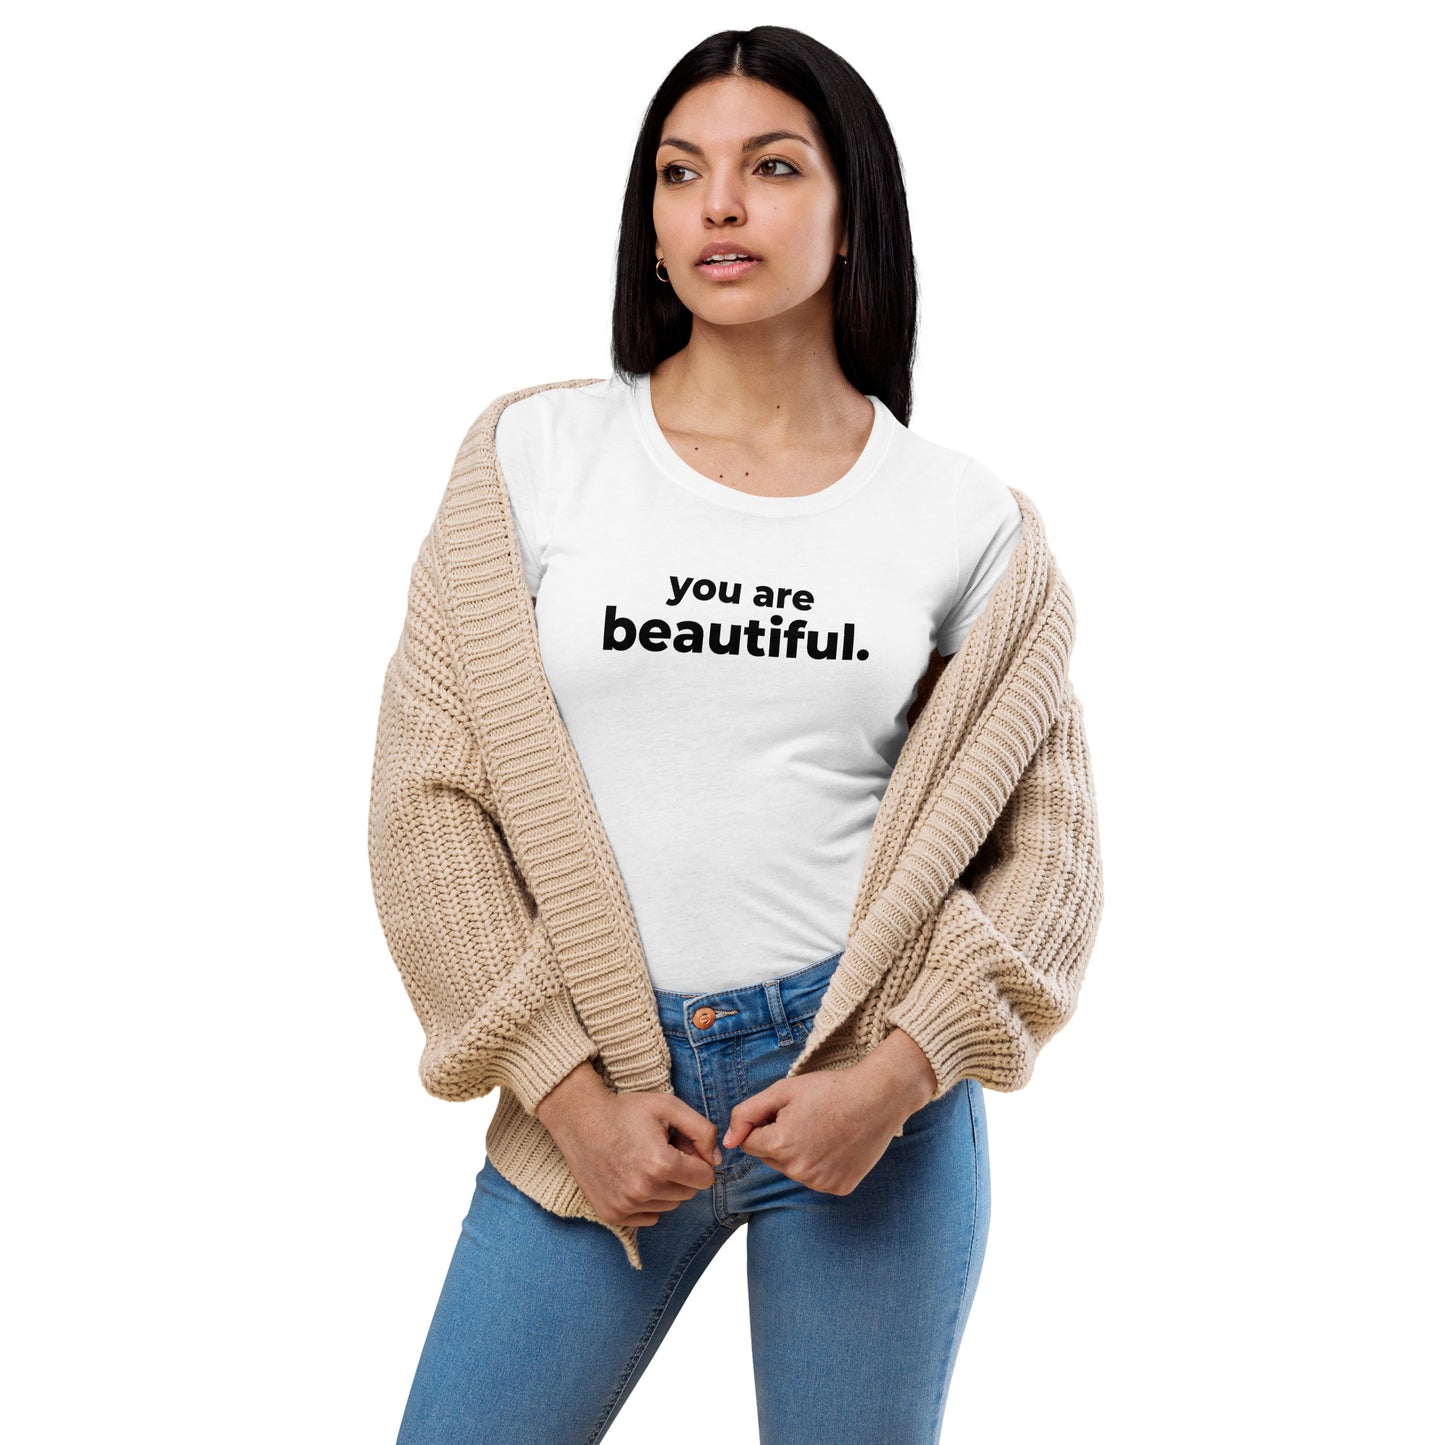 YOU ARE BEAUTIFUL - Women’s fitted t-shirt